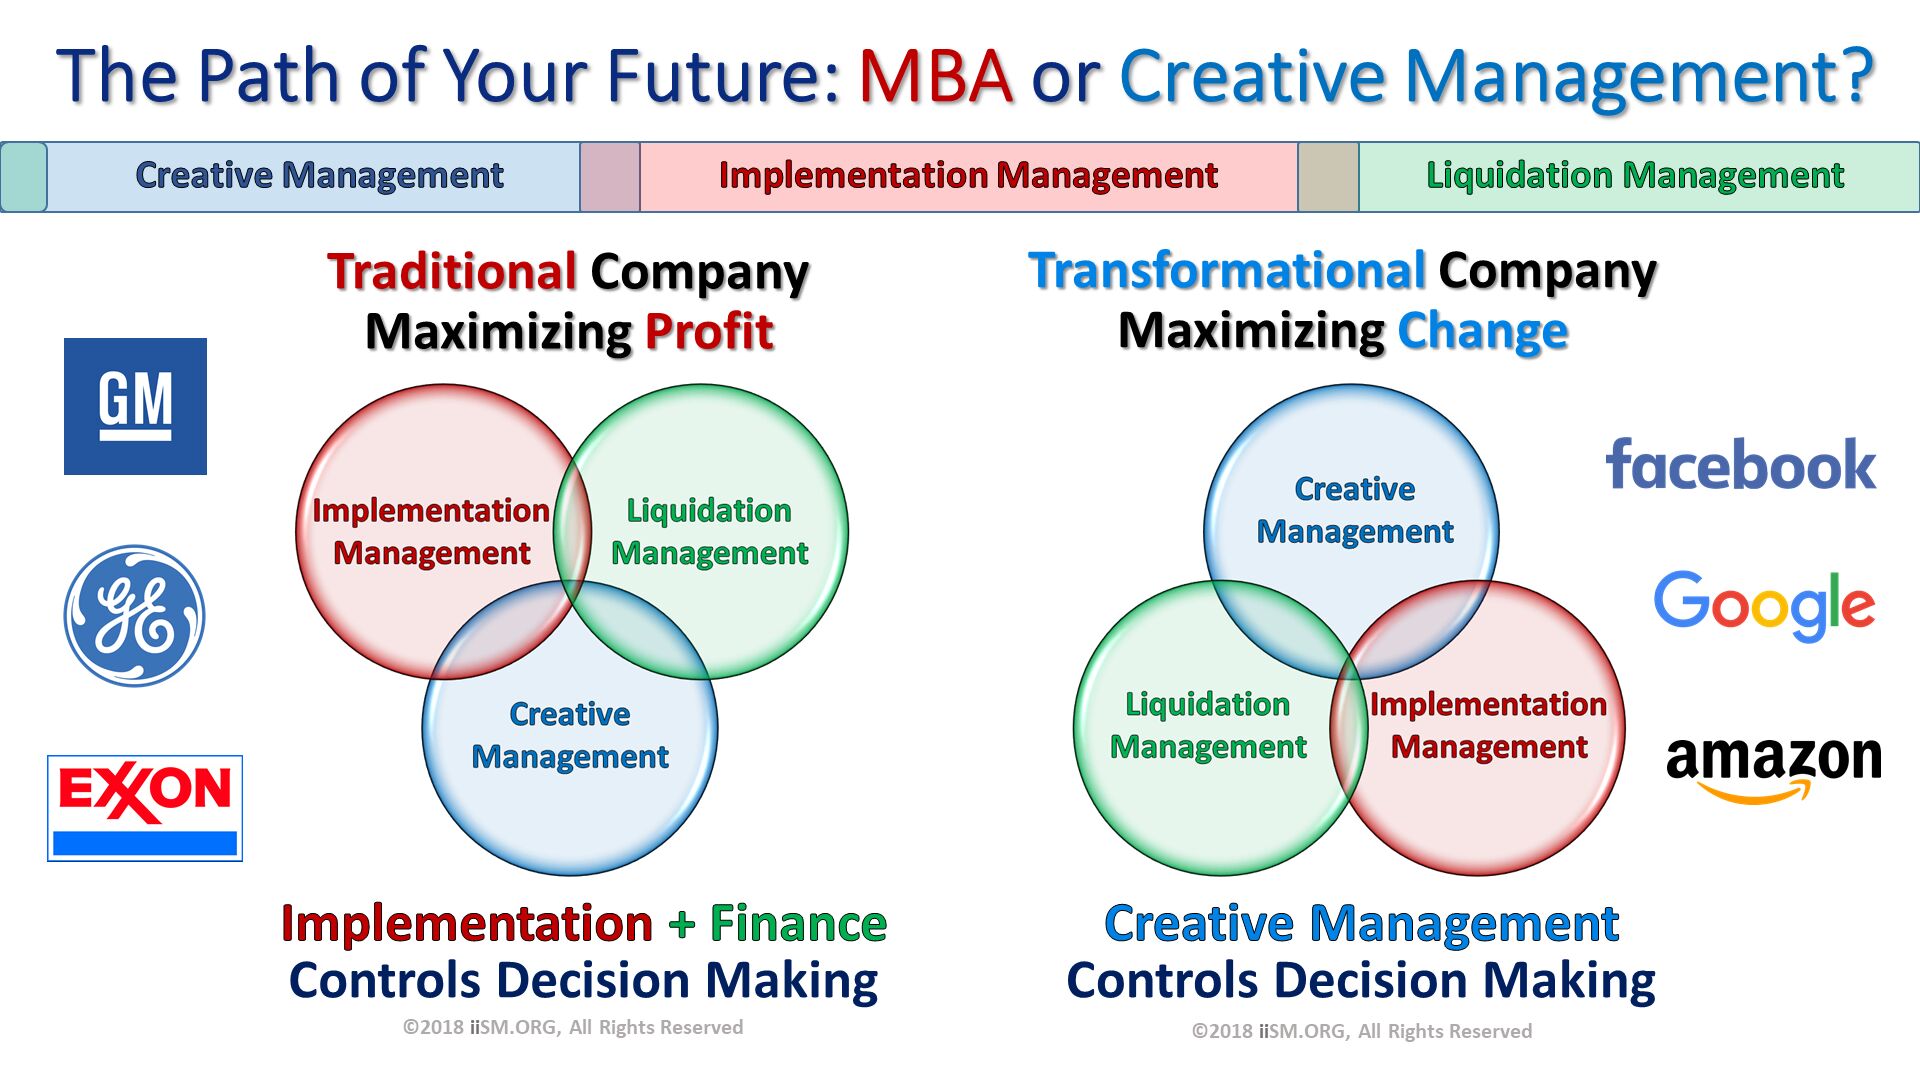 The Path of Your Future: MBA or Creative Management?. Traditional CompanyMaximizing Profit. Transformational CompanyMaximizing Change. ©2018 iiSM.ORG, All Rights Reserved. Implementation + Finance Controls Decision Making. Creative Management 
Controls Decision Making. ©2018 iiSM.ORG, All Rights Reserved. 